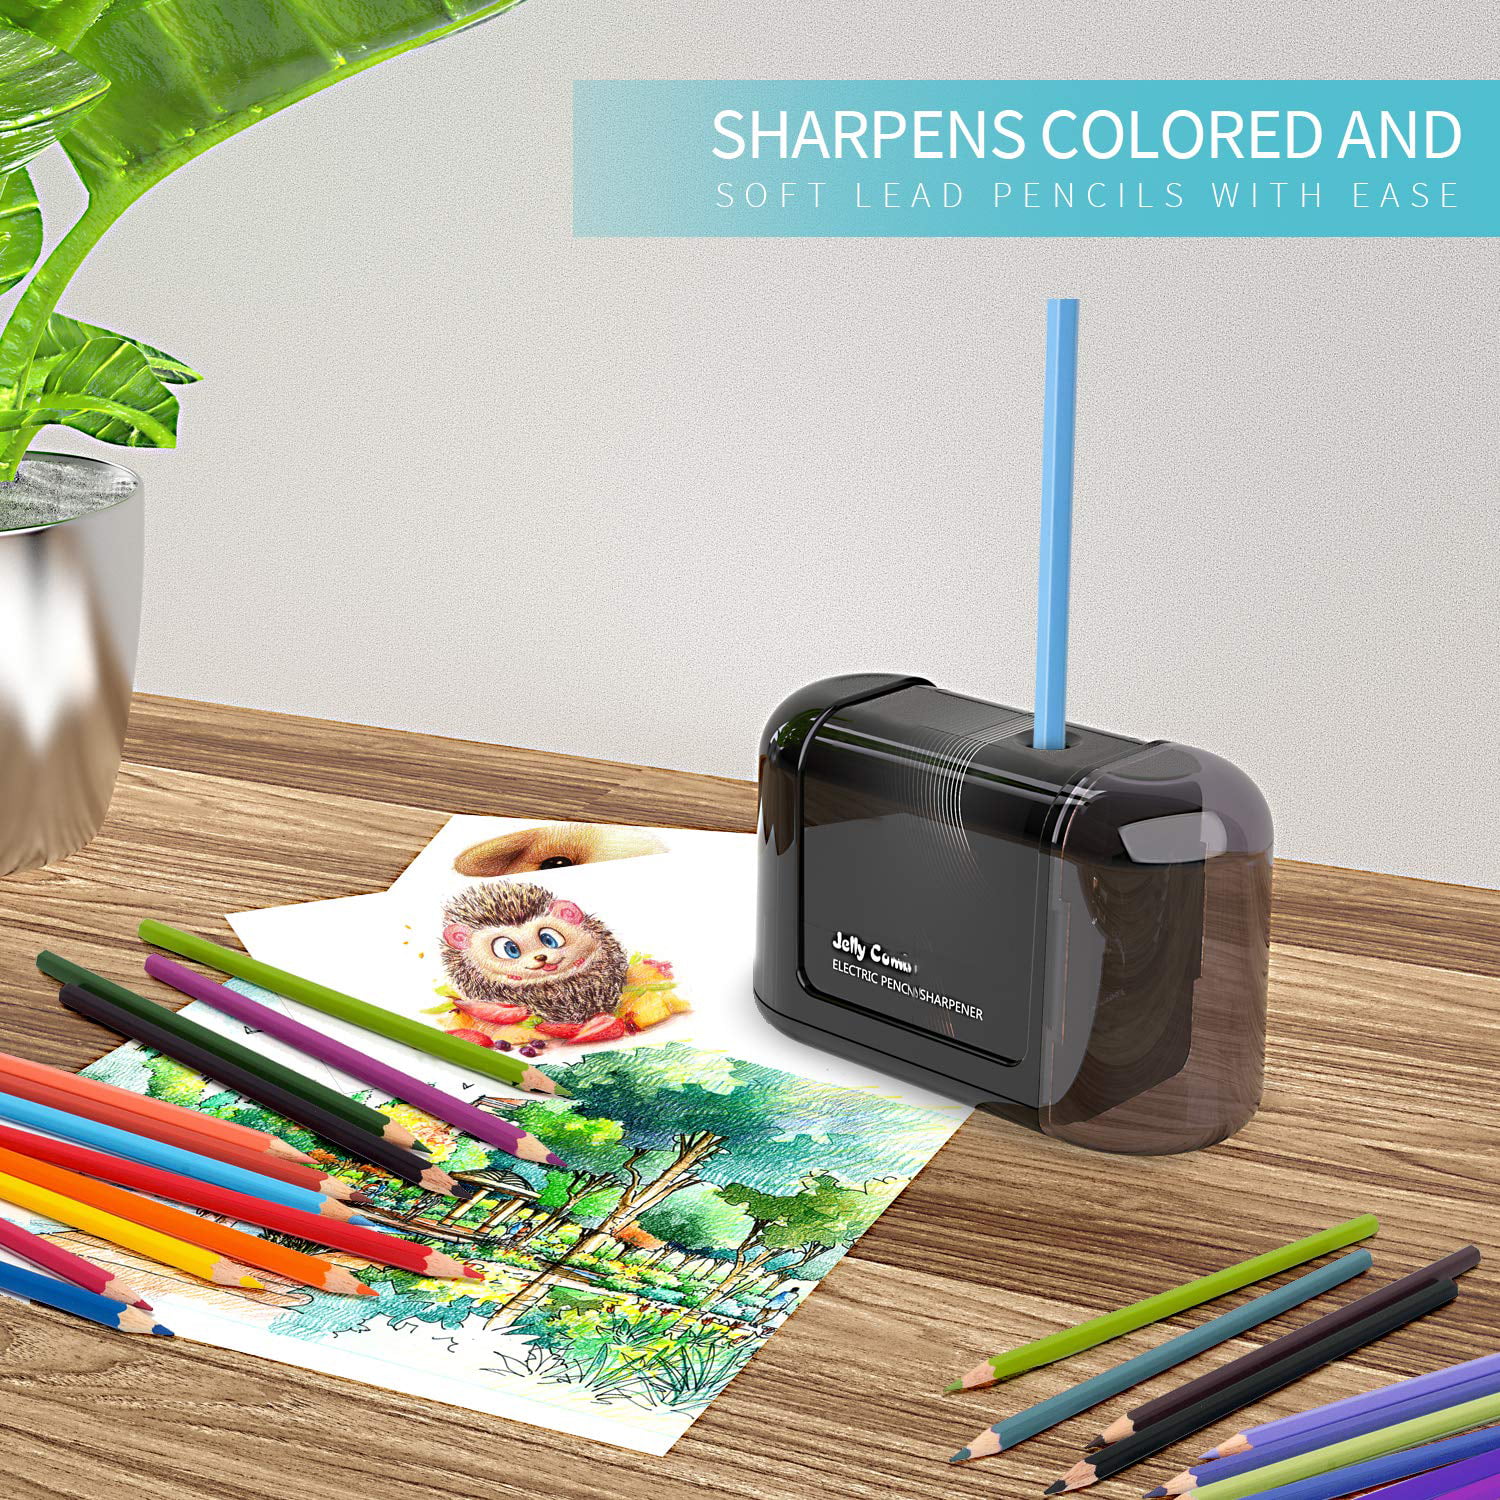 Office Electric Pencil Sharpener Jelly Comb Battery Operated Pencil Sharpener Ideal for No.2 and Colored Pencils No Cord Students Safety Design for Classroom,Home Artist